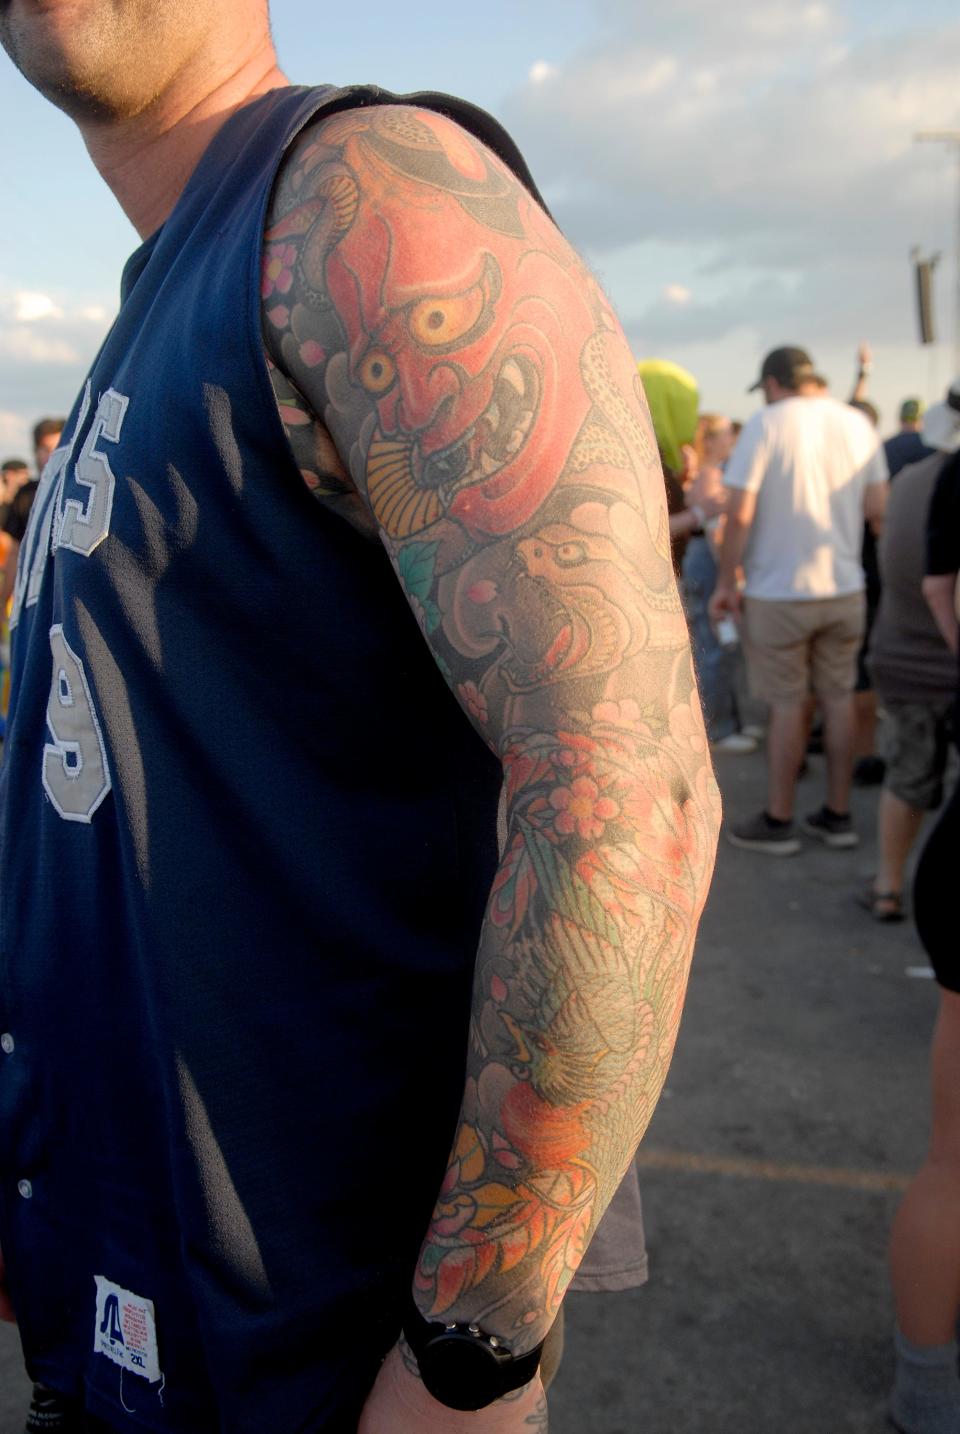 Luke Border poses with his tattoo at Louder Than Life on Friday. Sept. 22, 2023